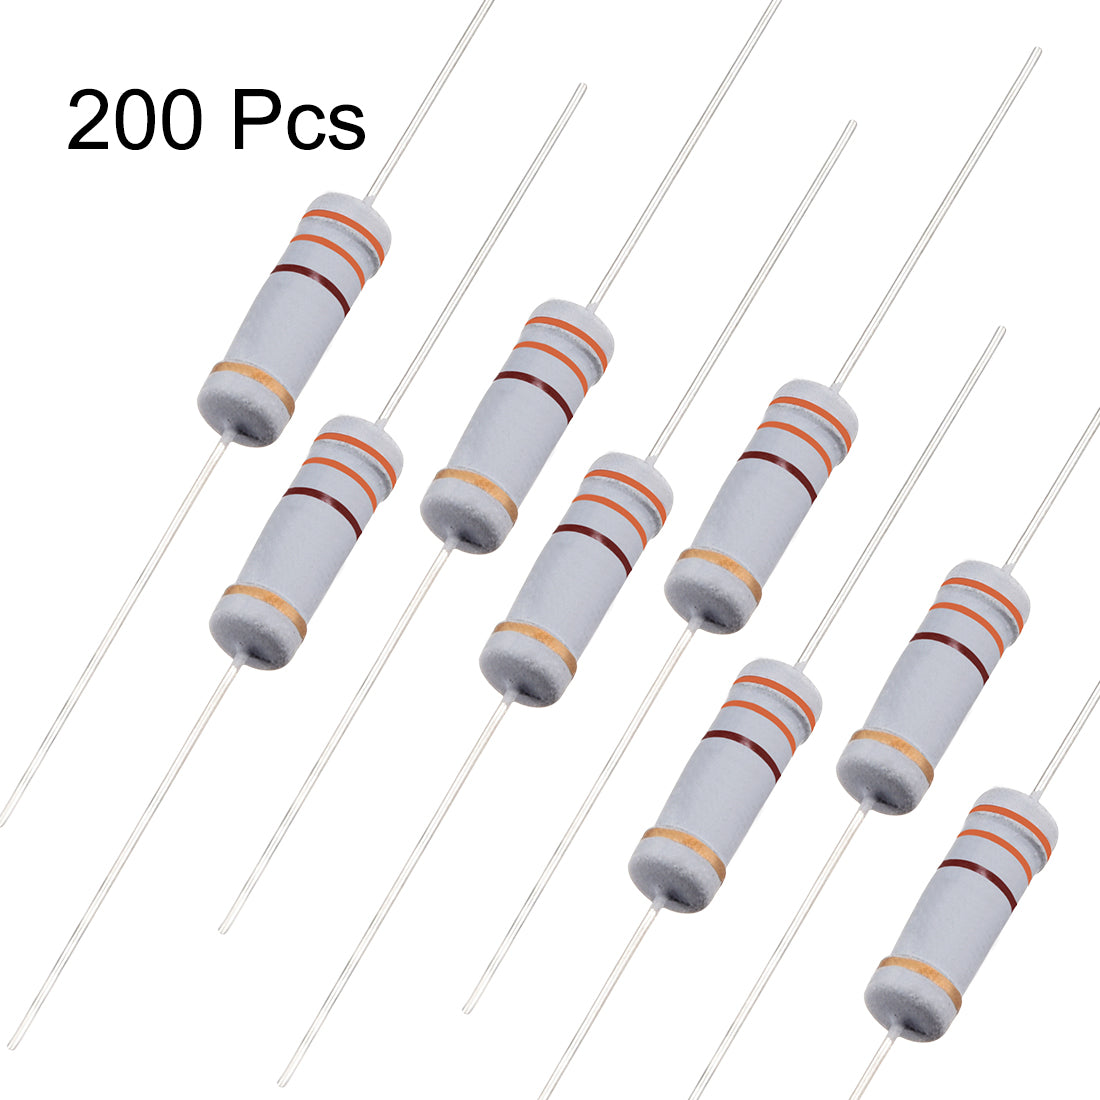 uxcell Uxcell 1W 330 Ohm Carbon Film Resistor 5% Tolerance 4 Color Bands Fixed Resistor 200Pcs